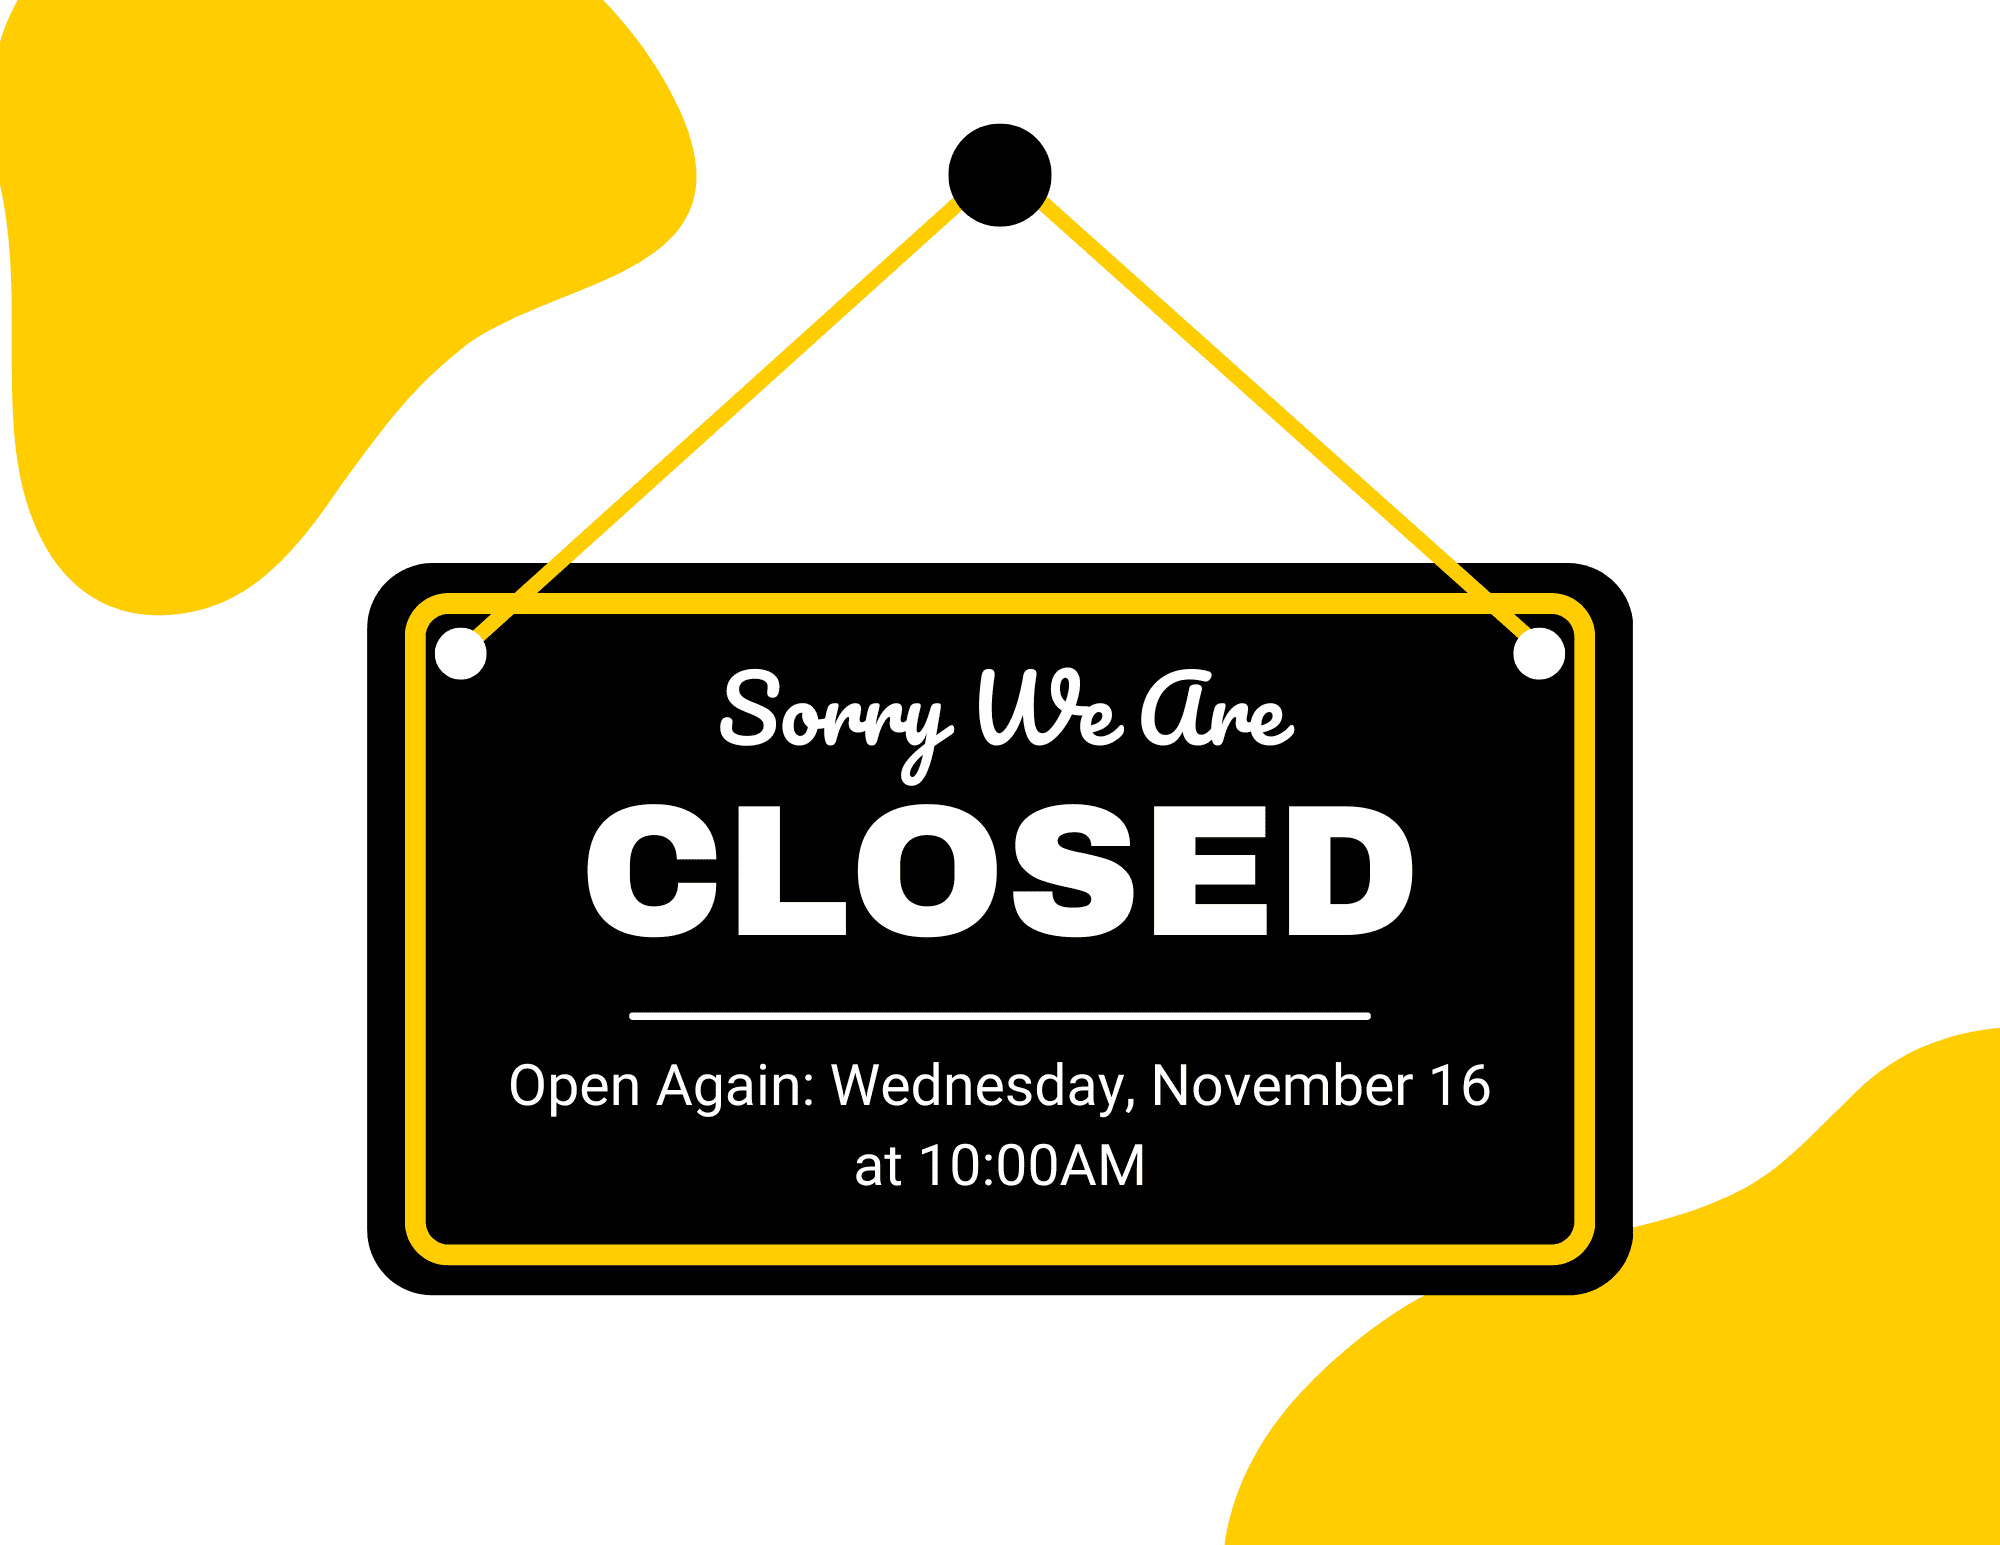 Sorry we are closed! Open Again: Wednesday, November 16th at 10:00AM.